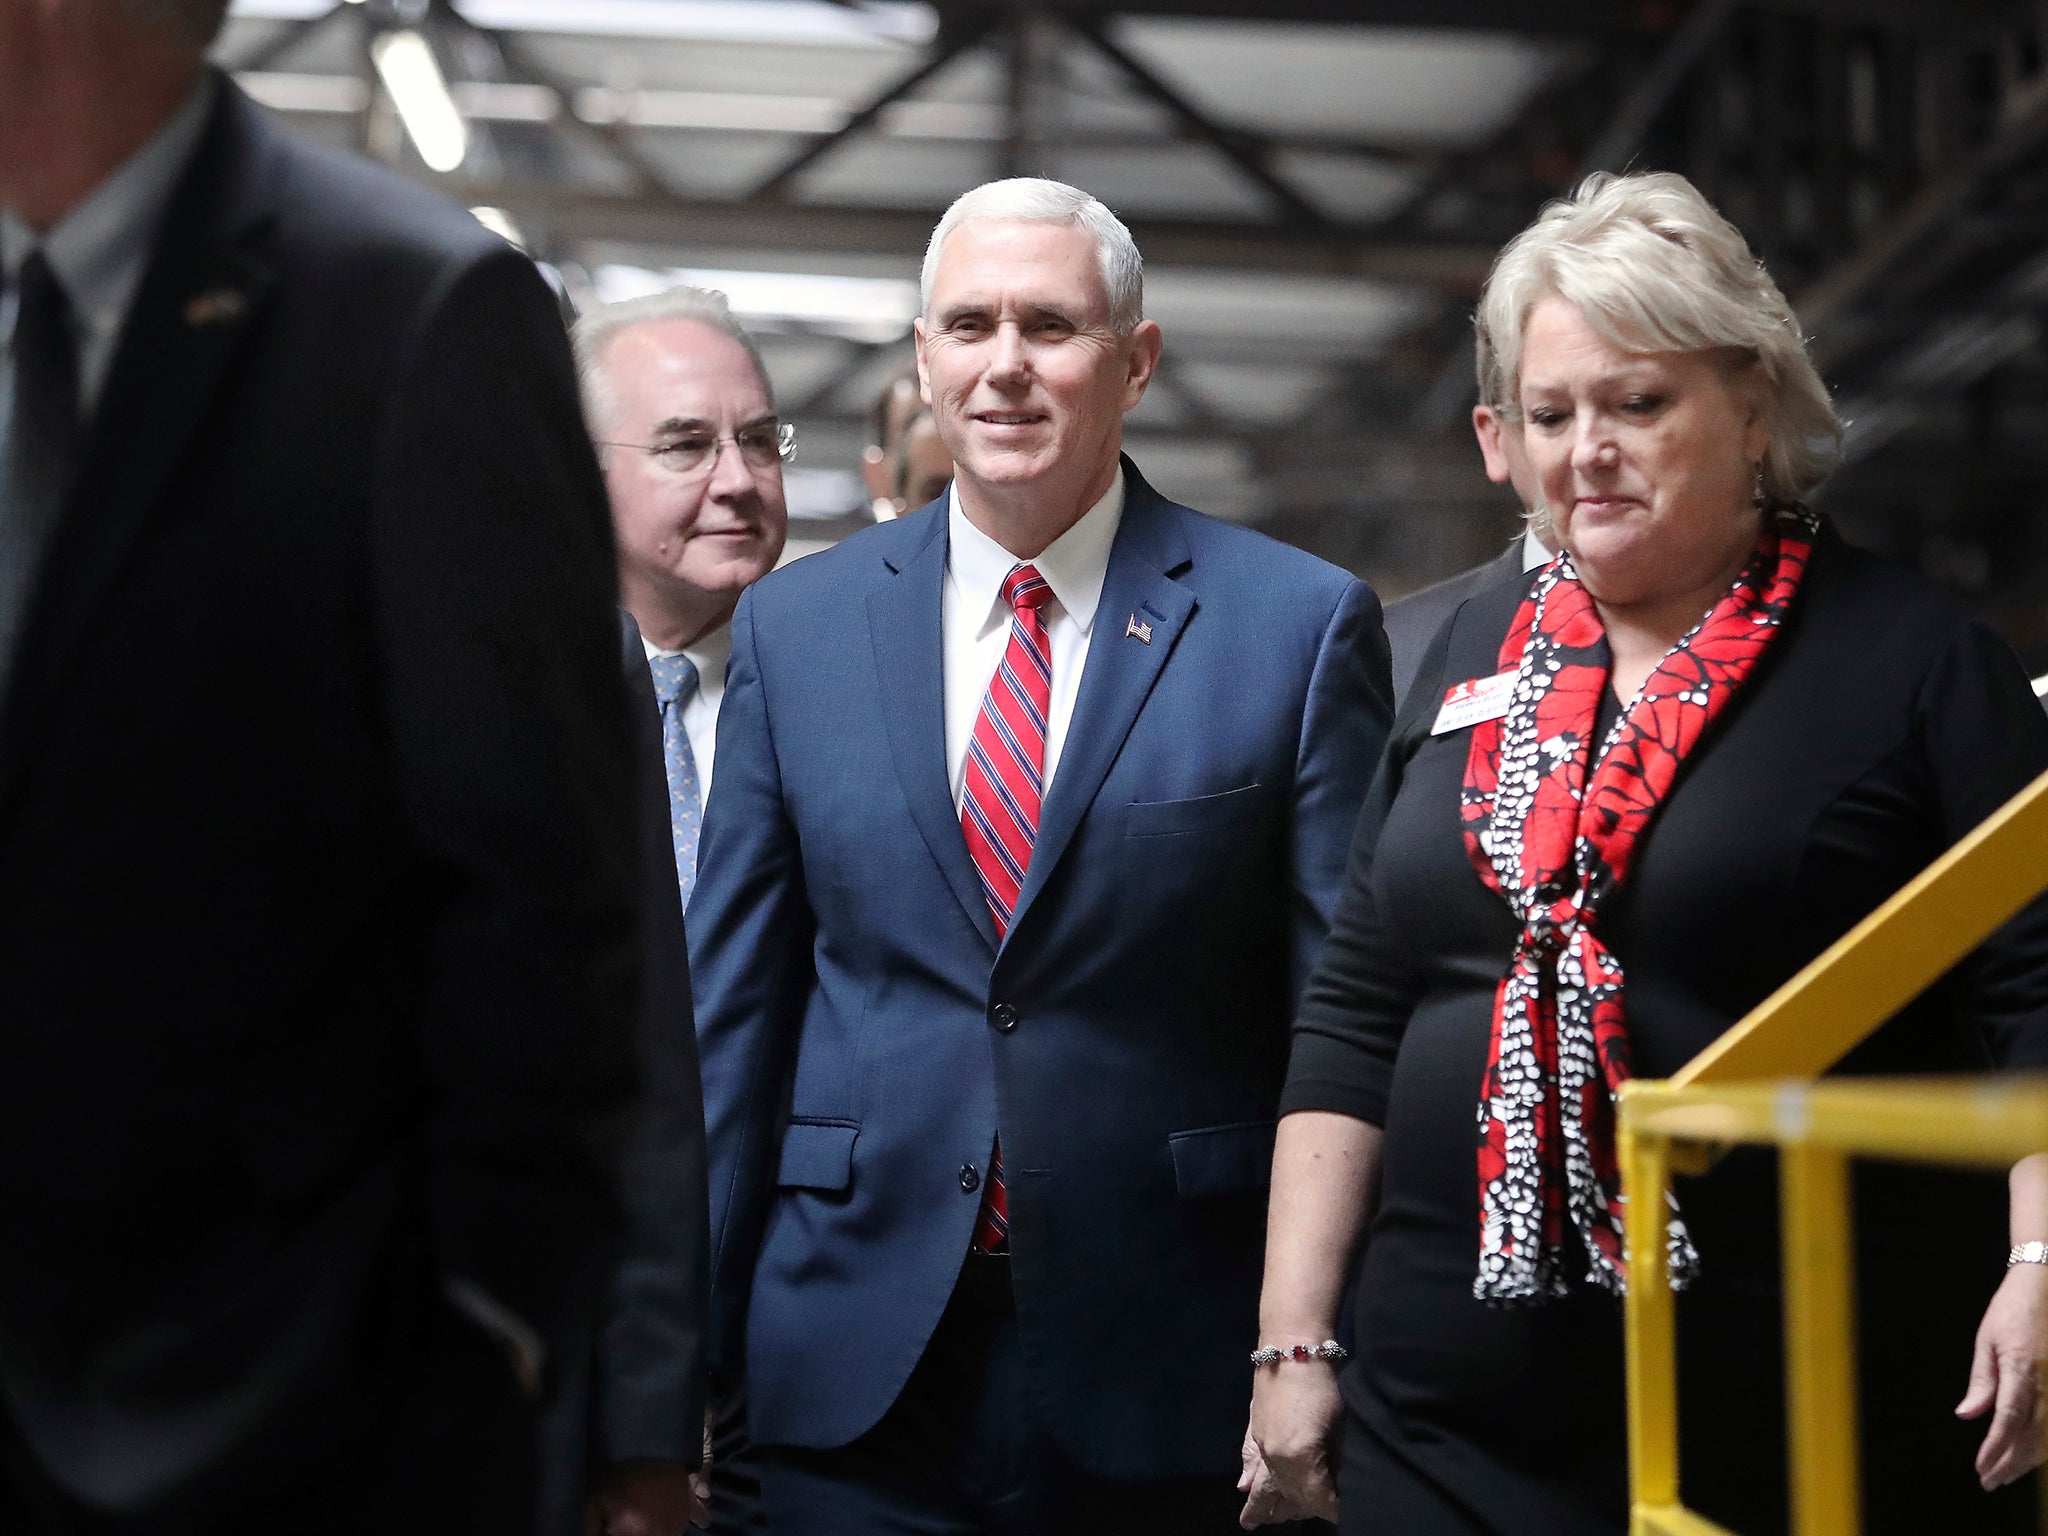 Vice President Mike Pence takes a short tour of the Blain Supply's company headquarters and warehousing facility during his visit to Wisconsin